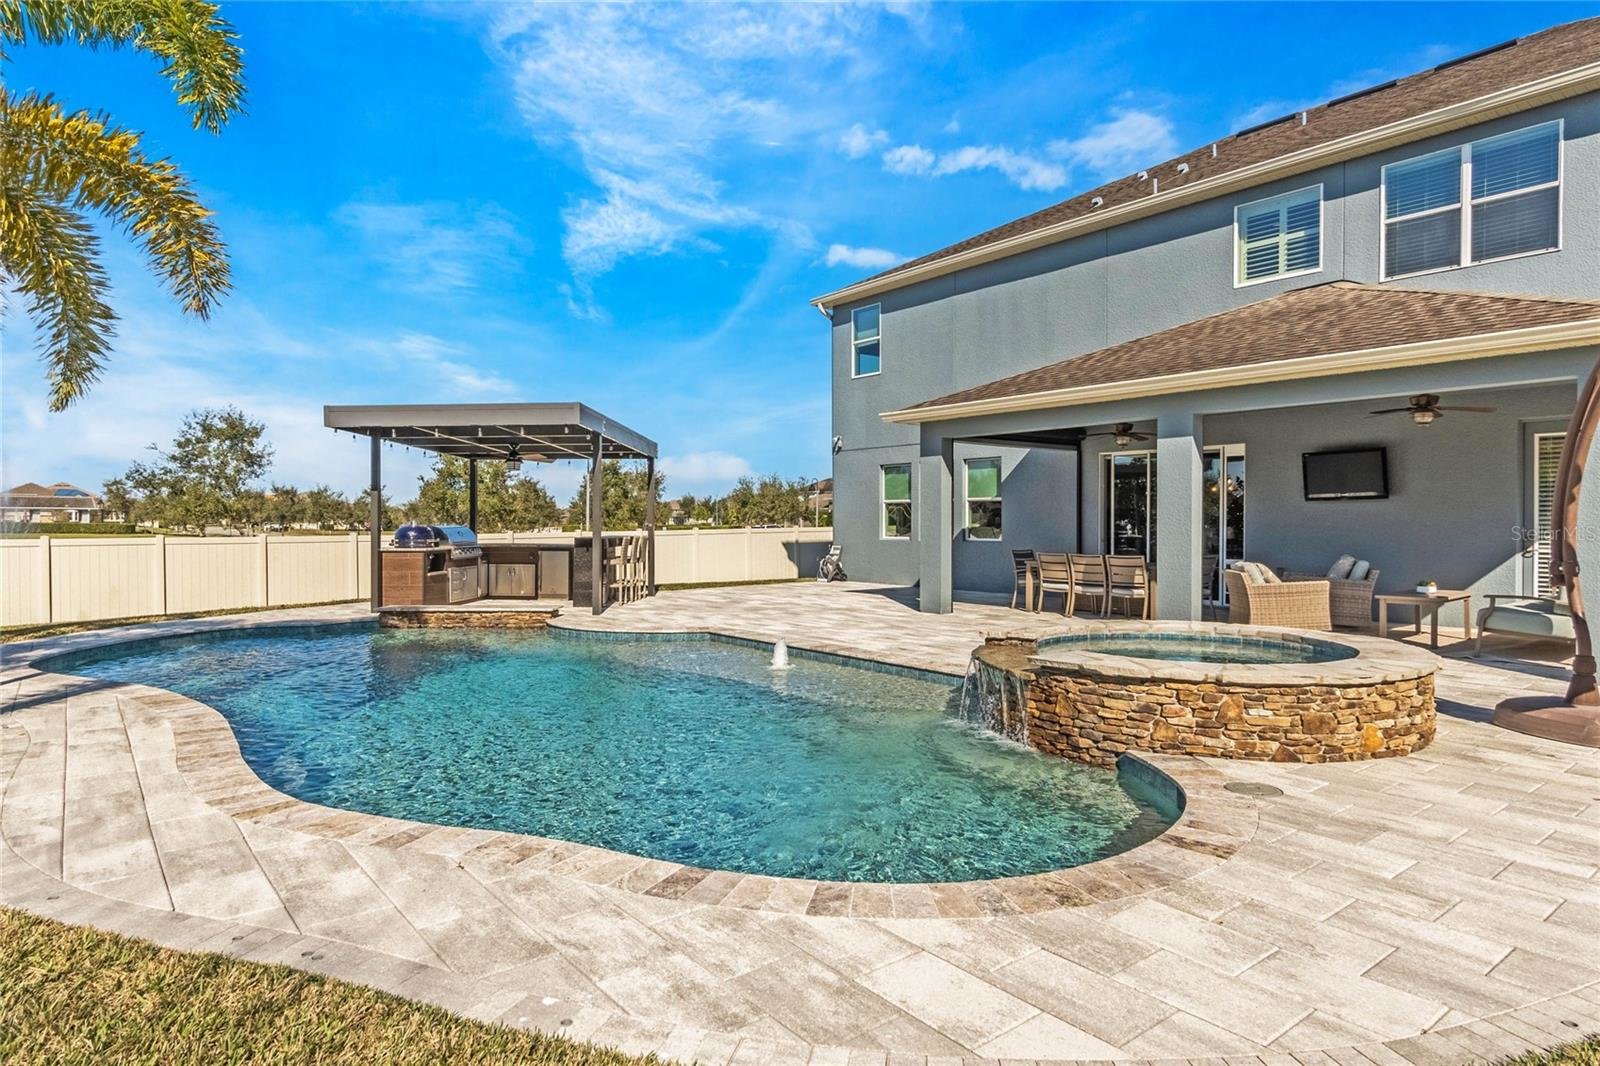 In-ground pool in backyard of Hickory Hammock home